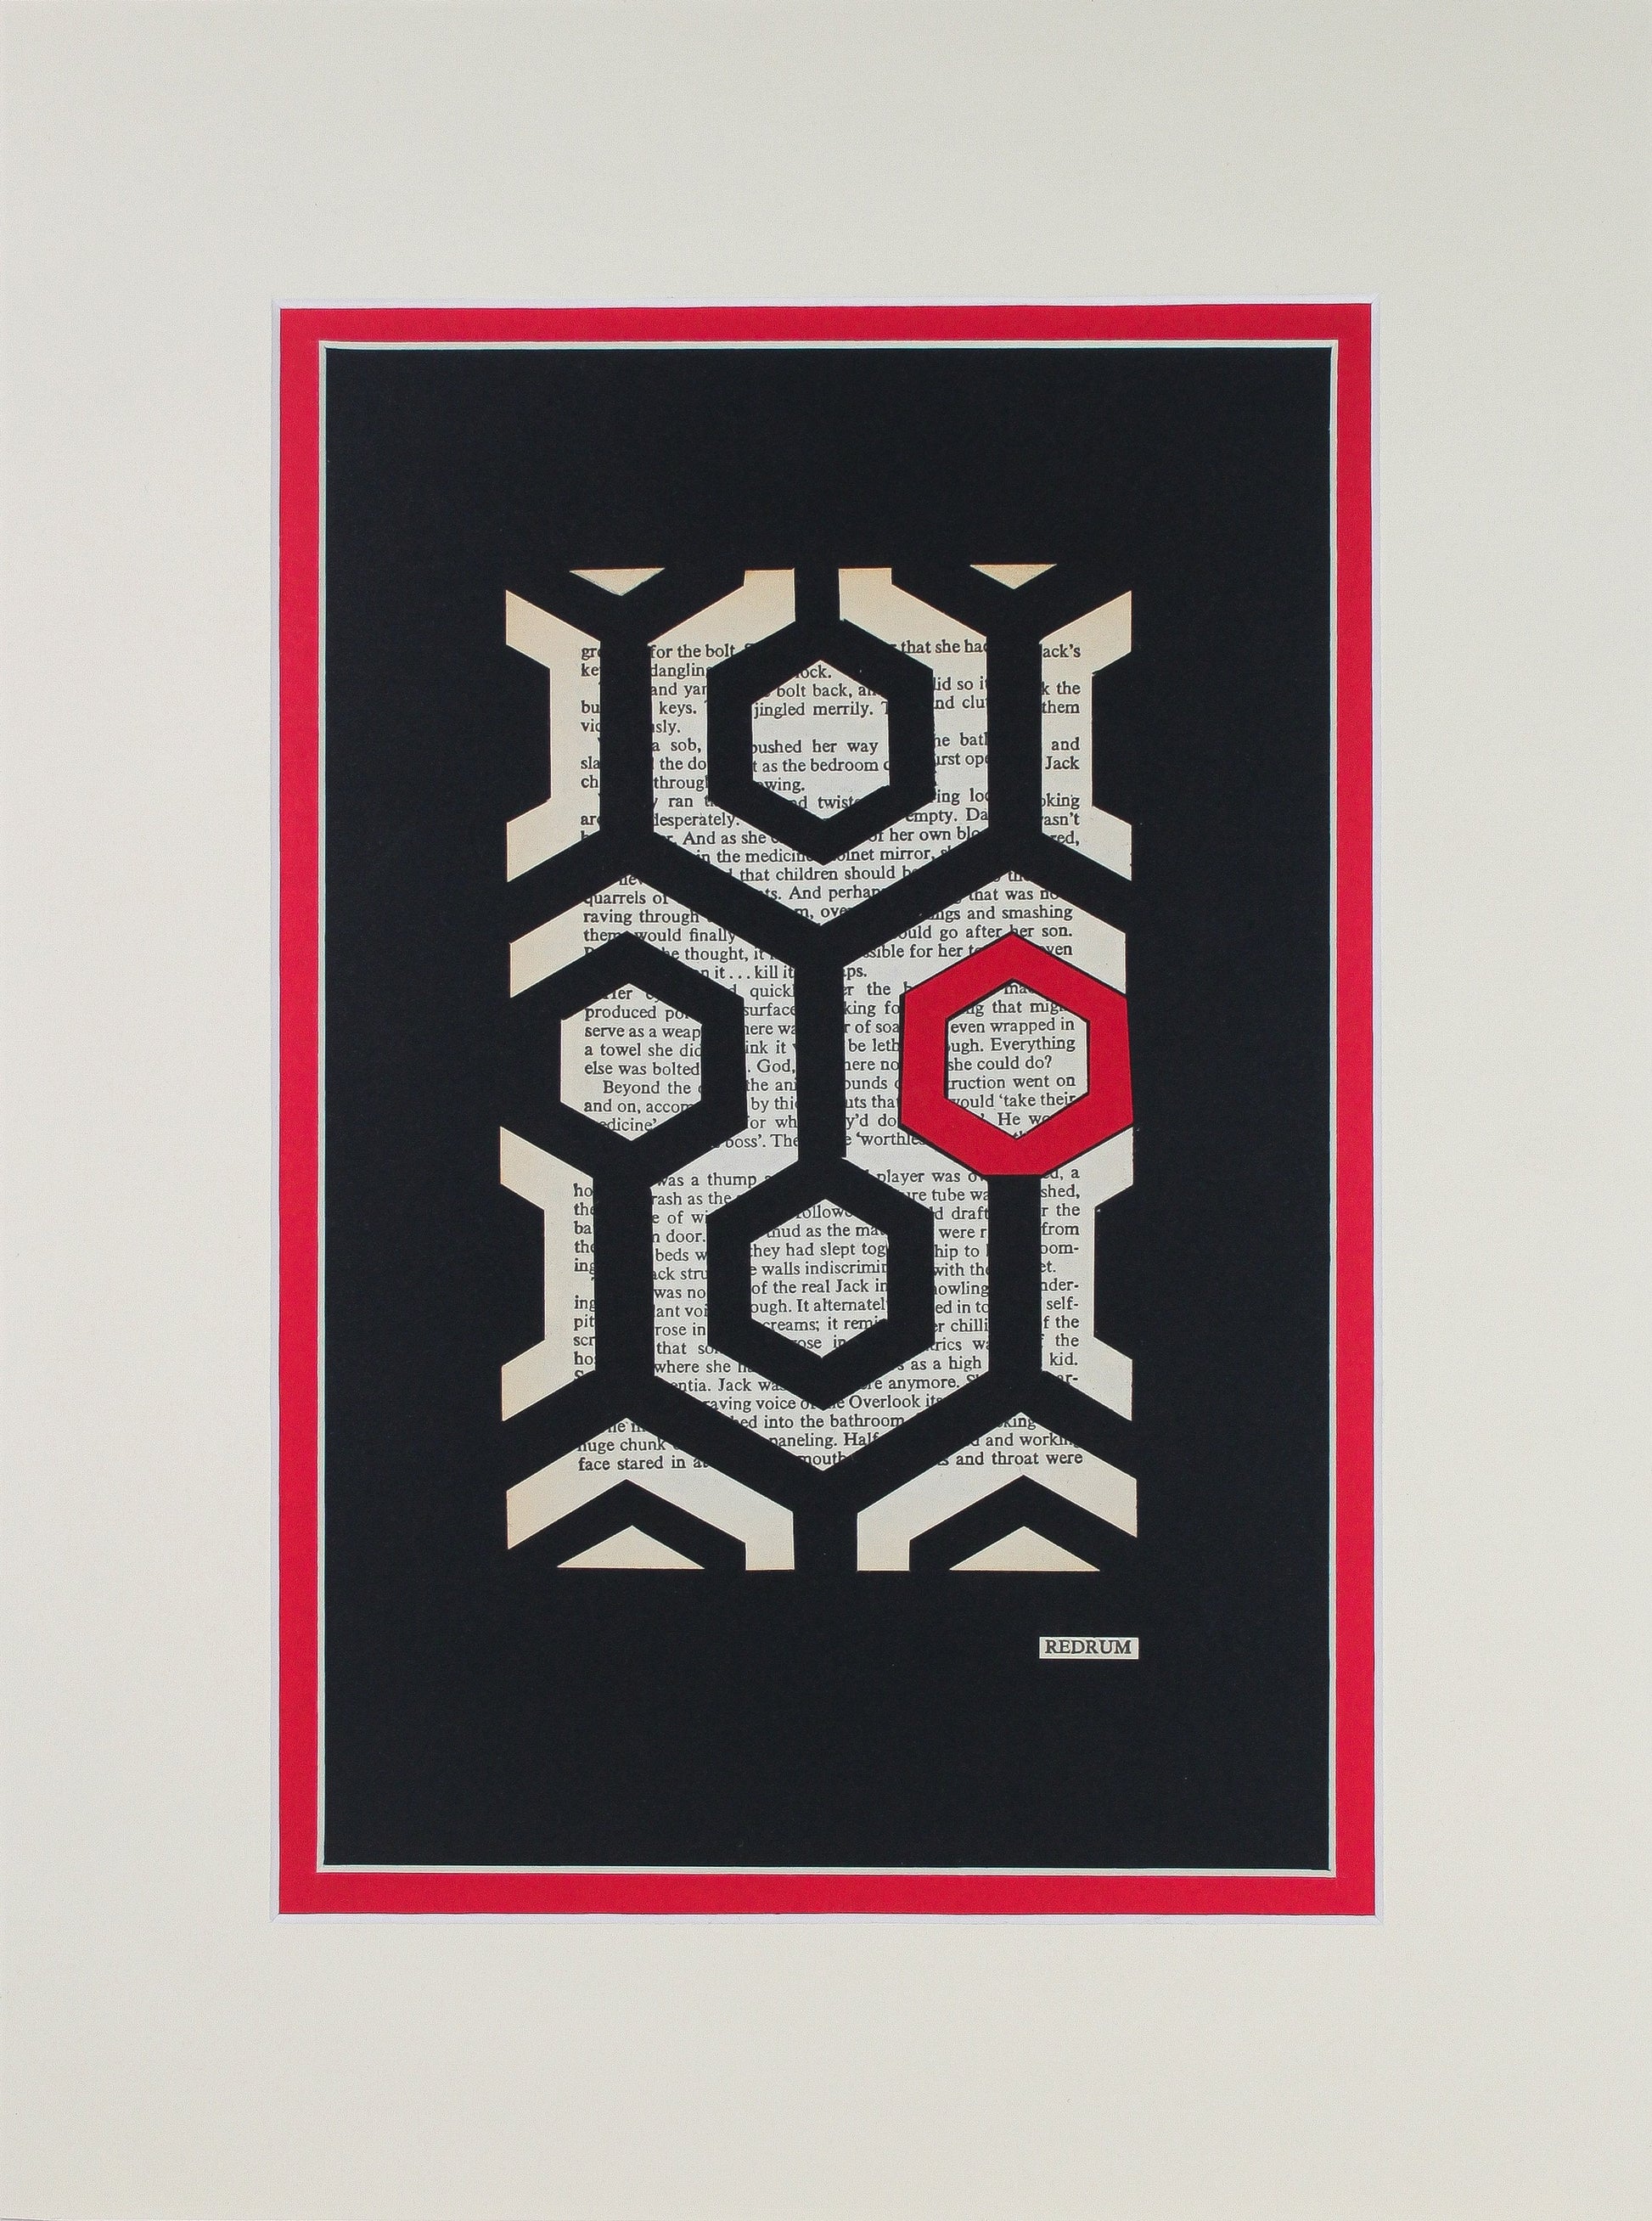 The Shining "REDRUM 382" | Double Paper Cut | Limited Edition 1 of 1 - James Voce // artist